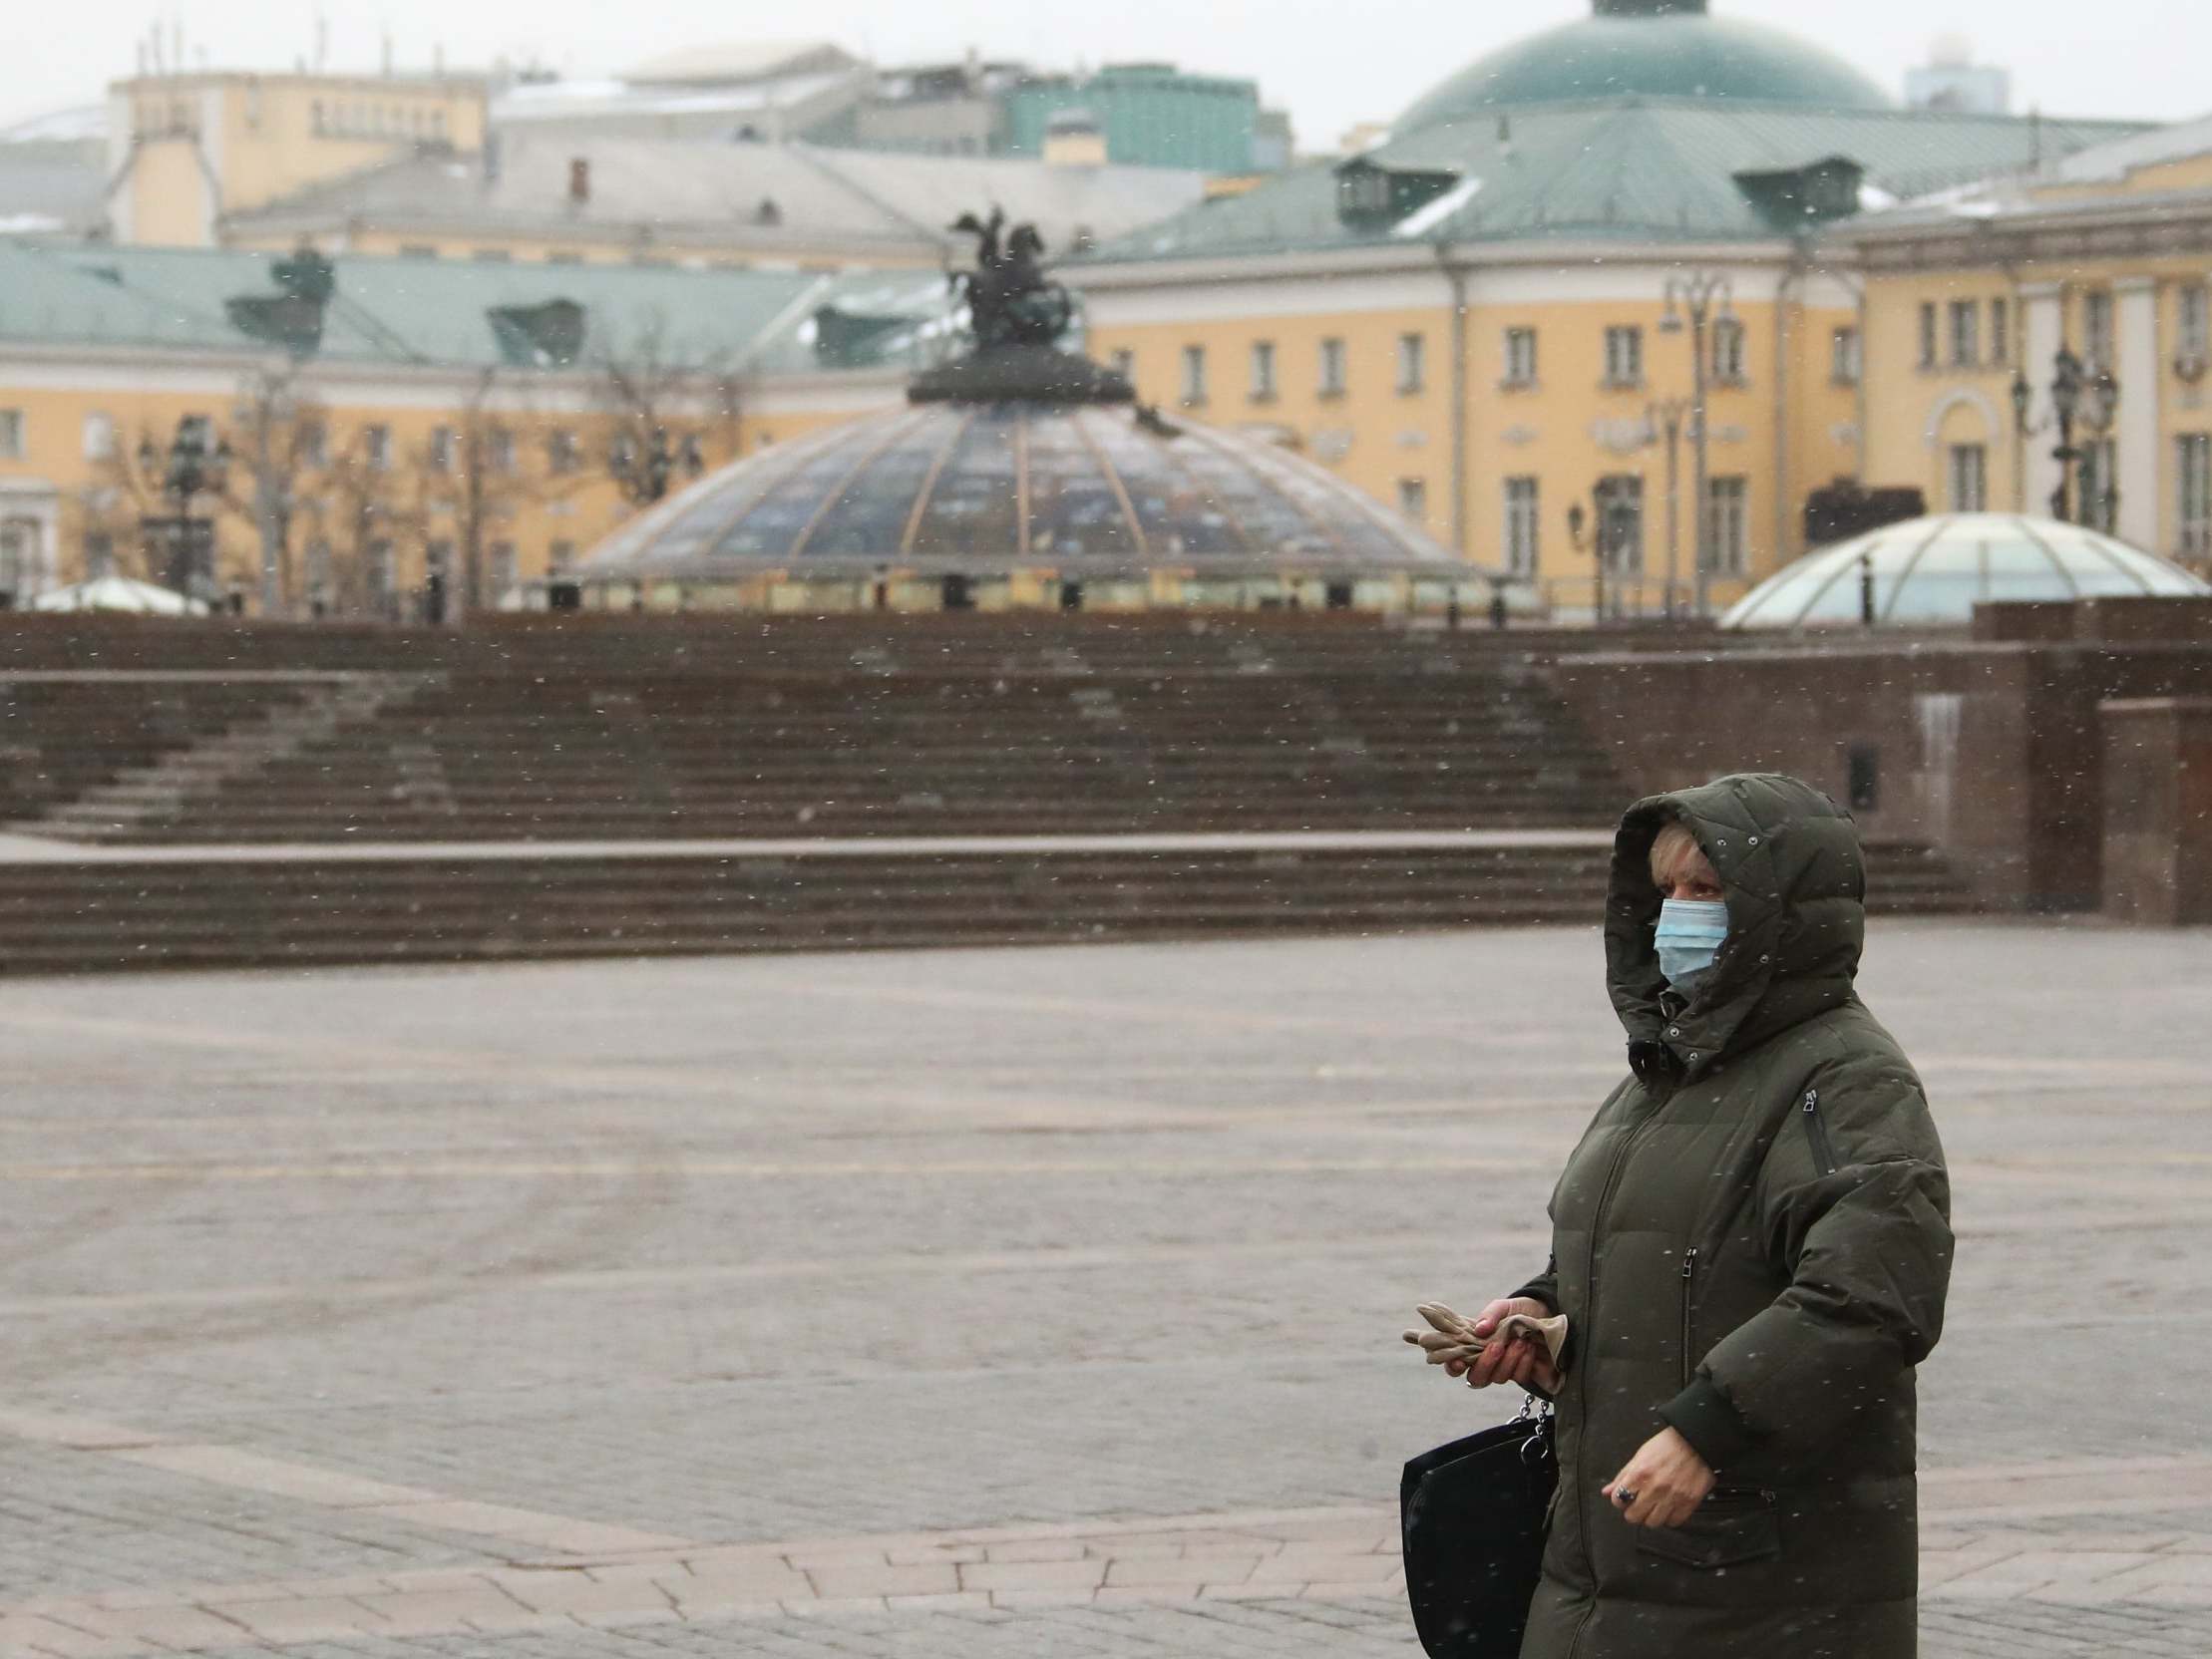 Russia, known for its strict media regulation, has tightened its output even more when reporting the pandemic